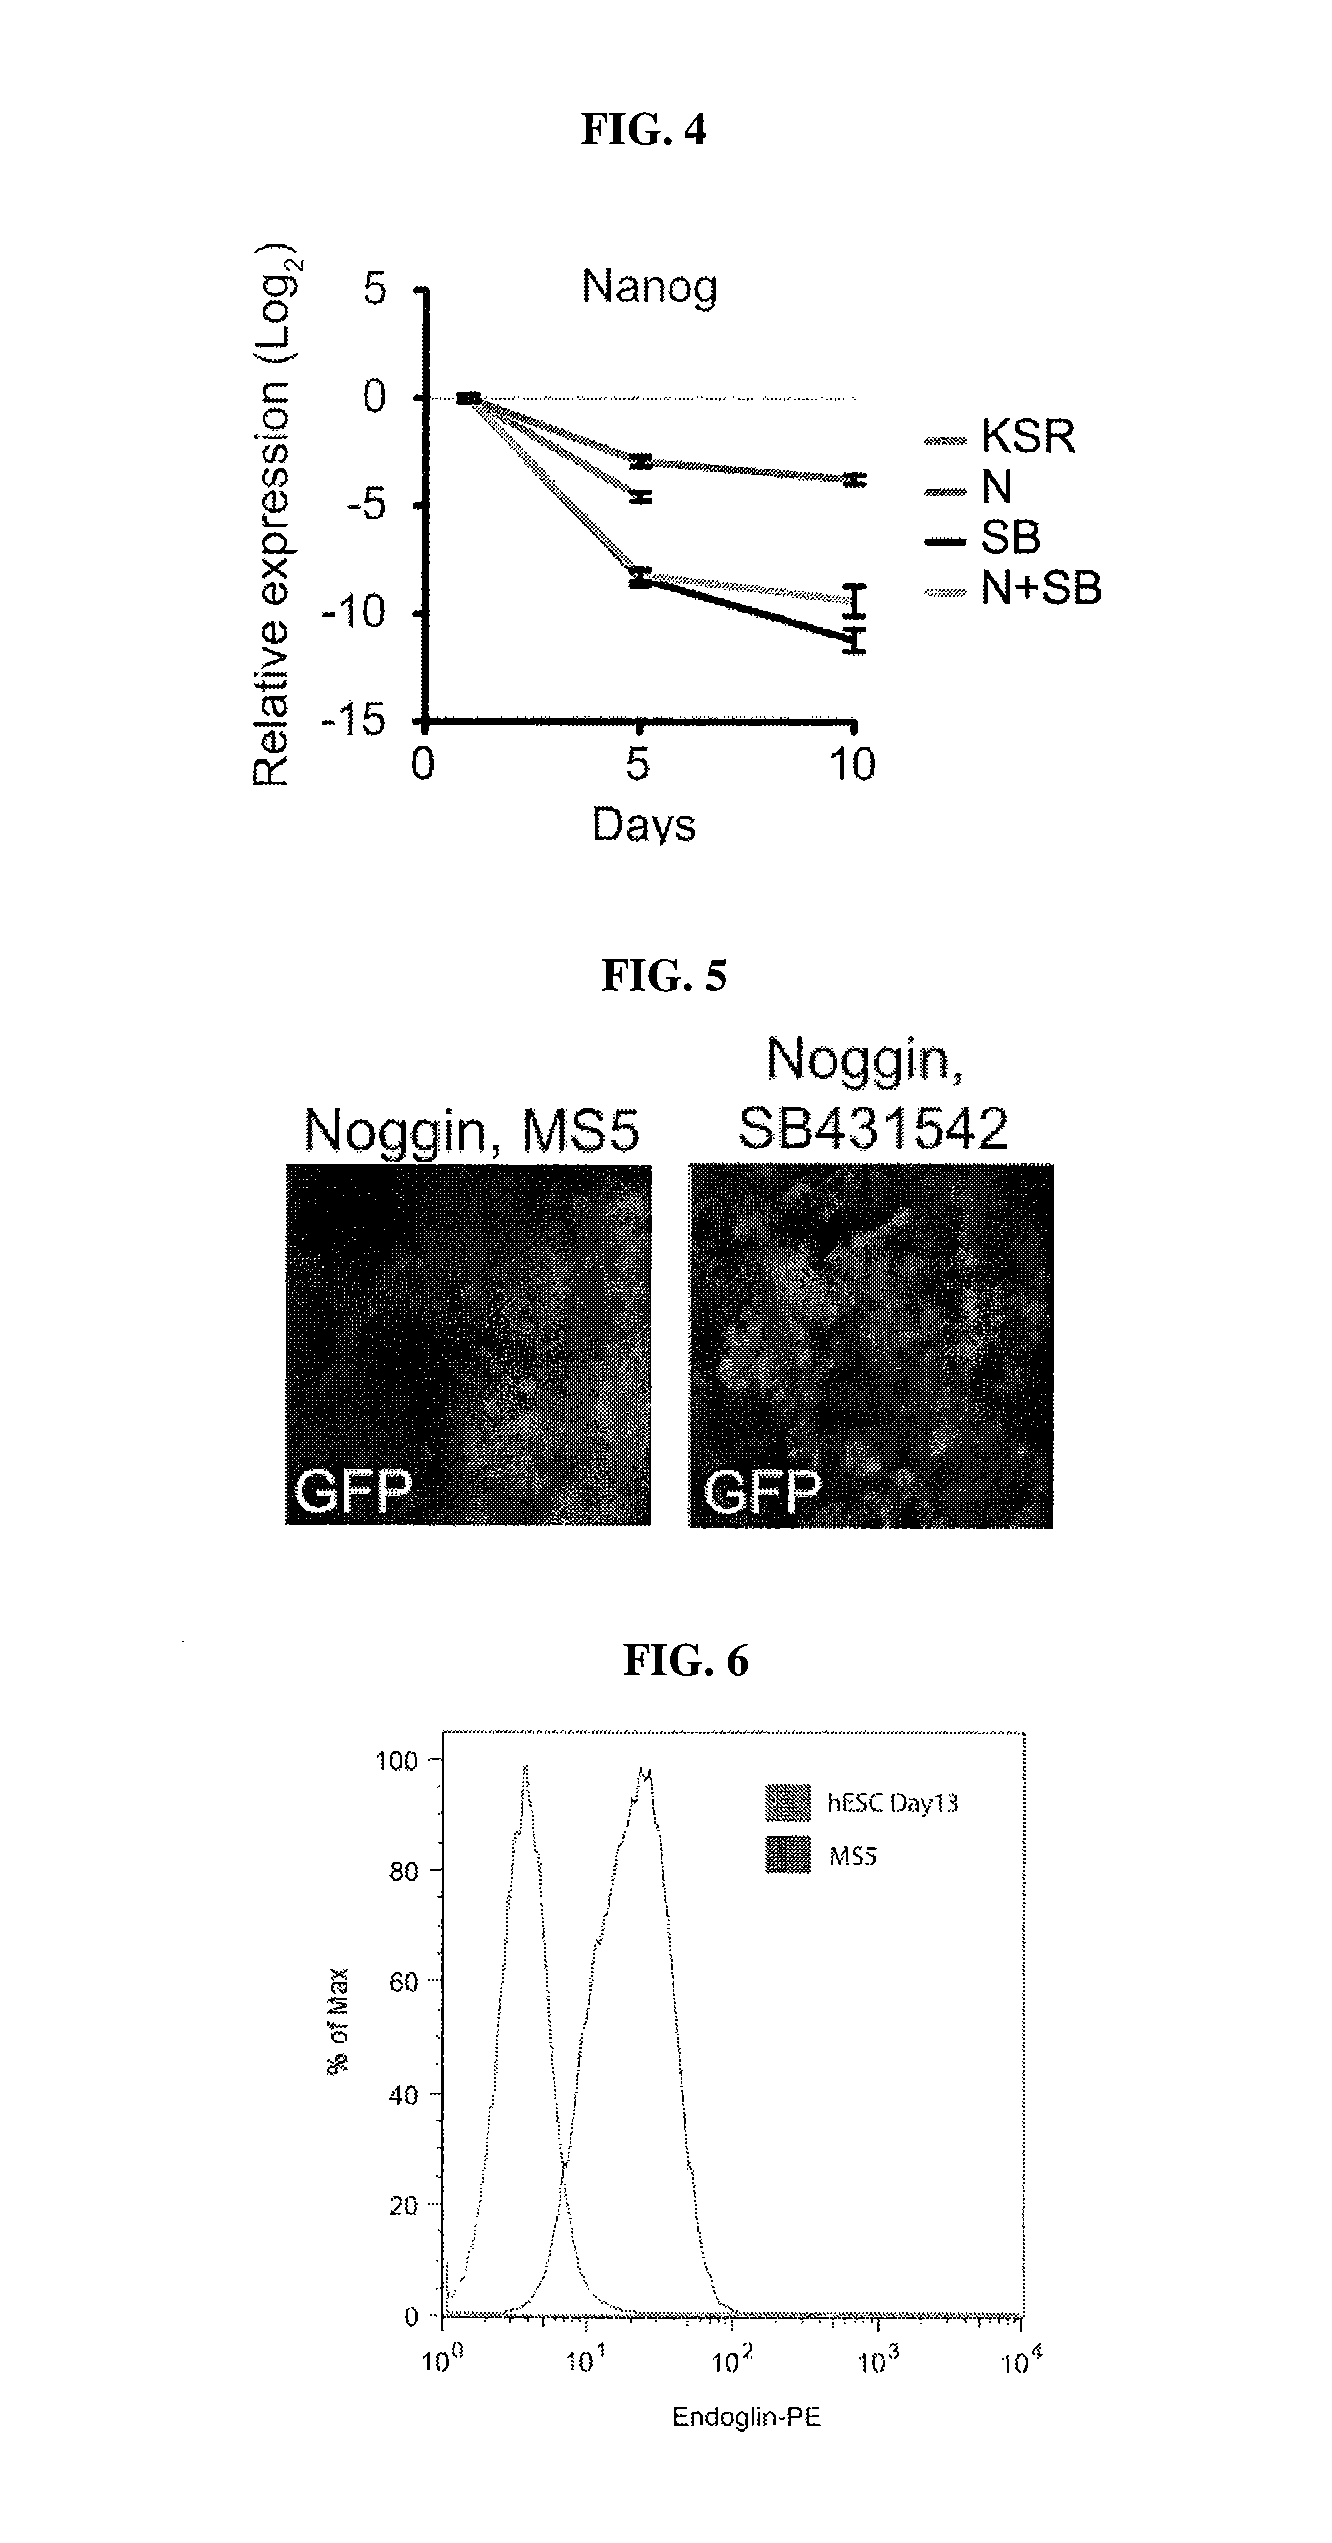 Methods of neural conversion of human embryonic stem cells